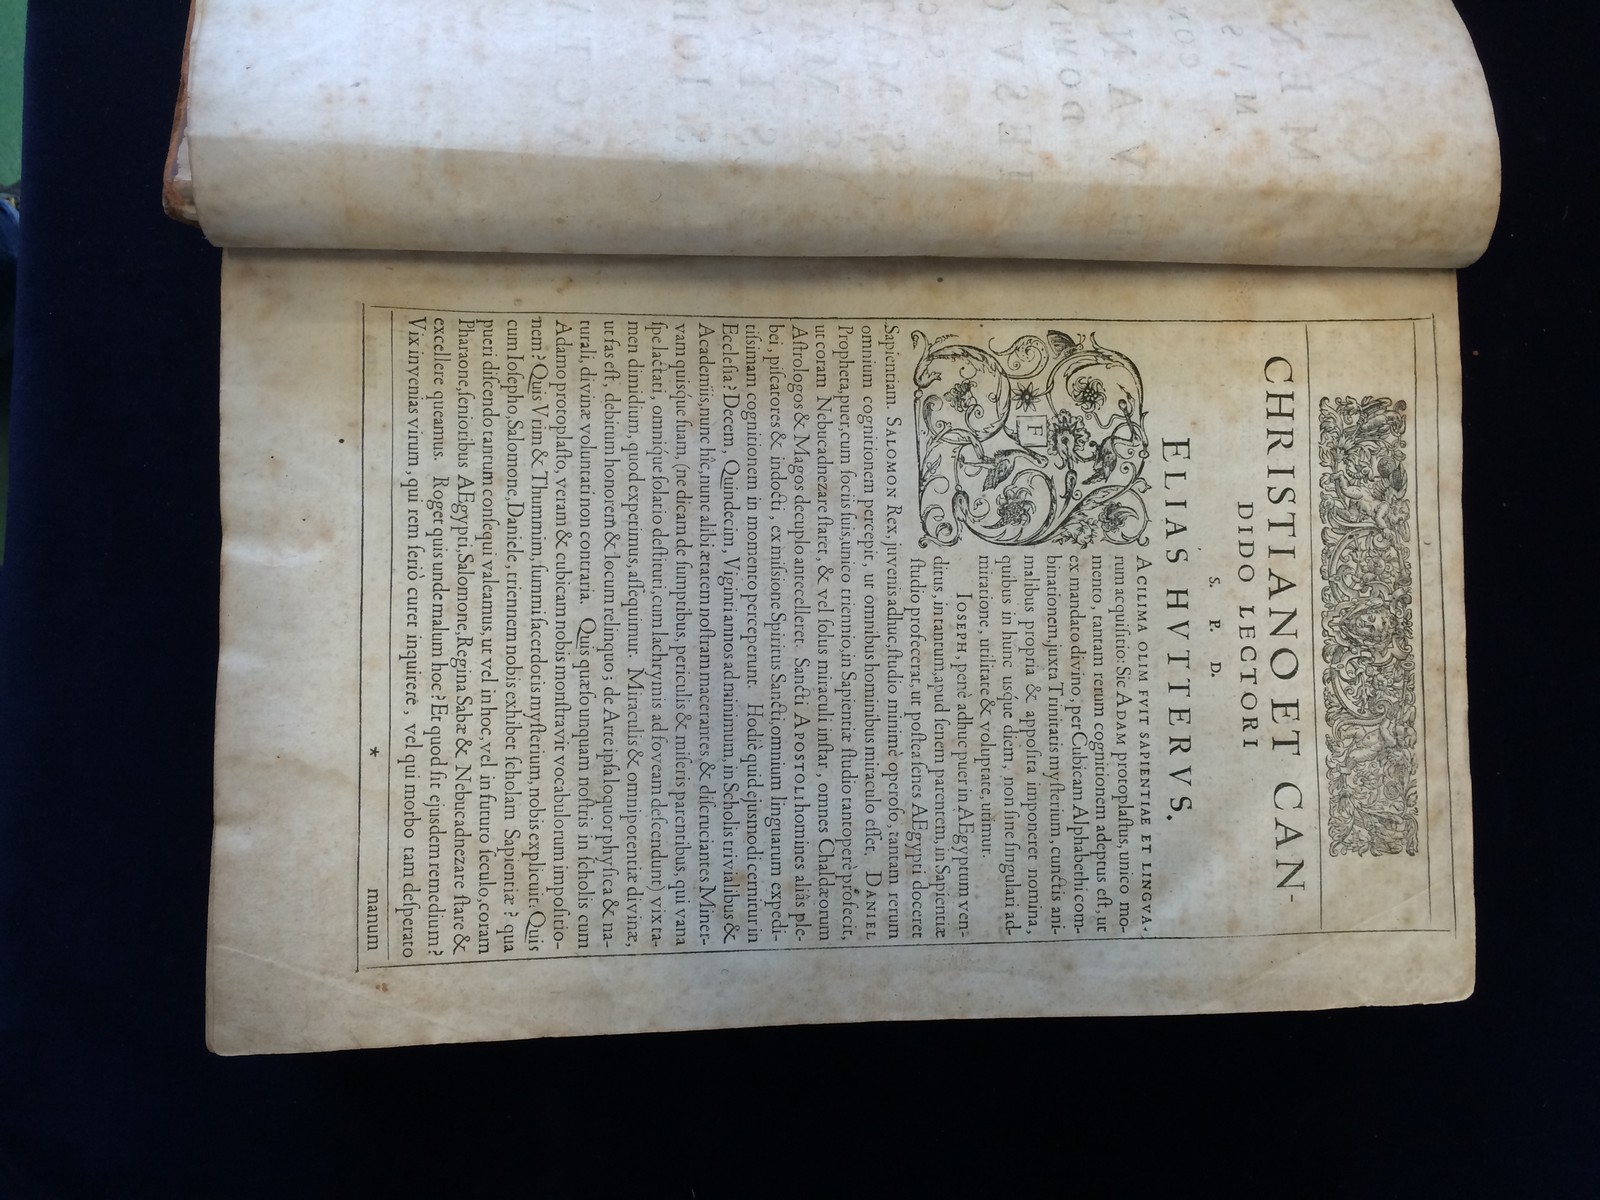 "The Elias Hutter Polyglot Bible" - both volumes, first edition printed 1599.  The New Testament - Image 2 of 6